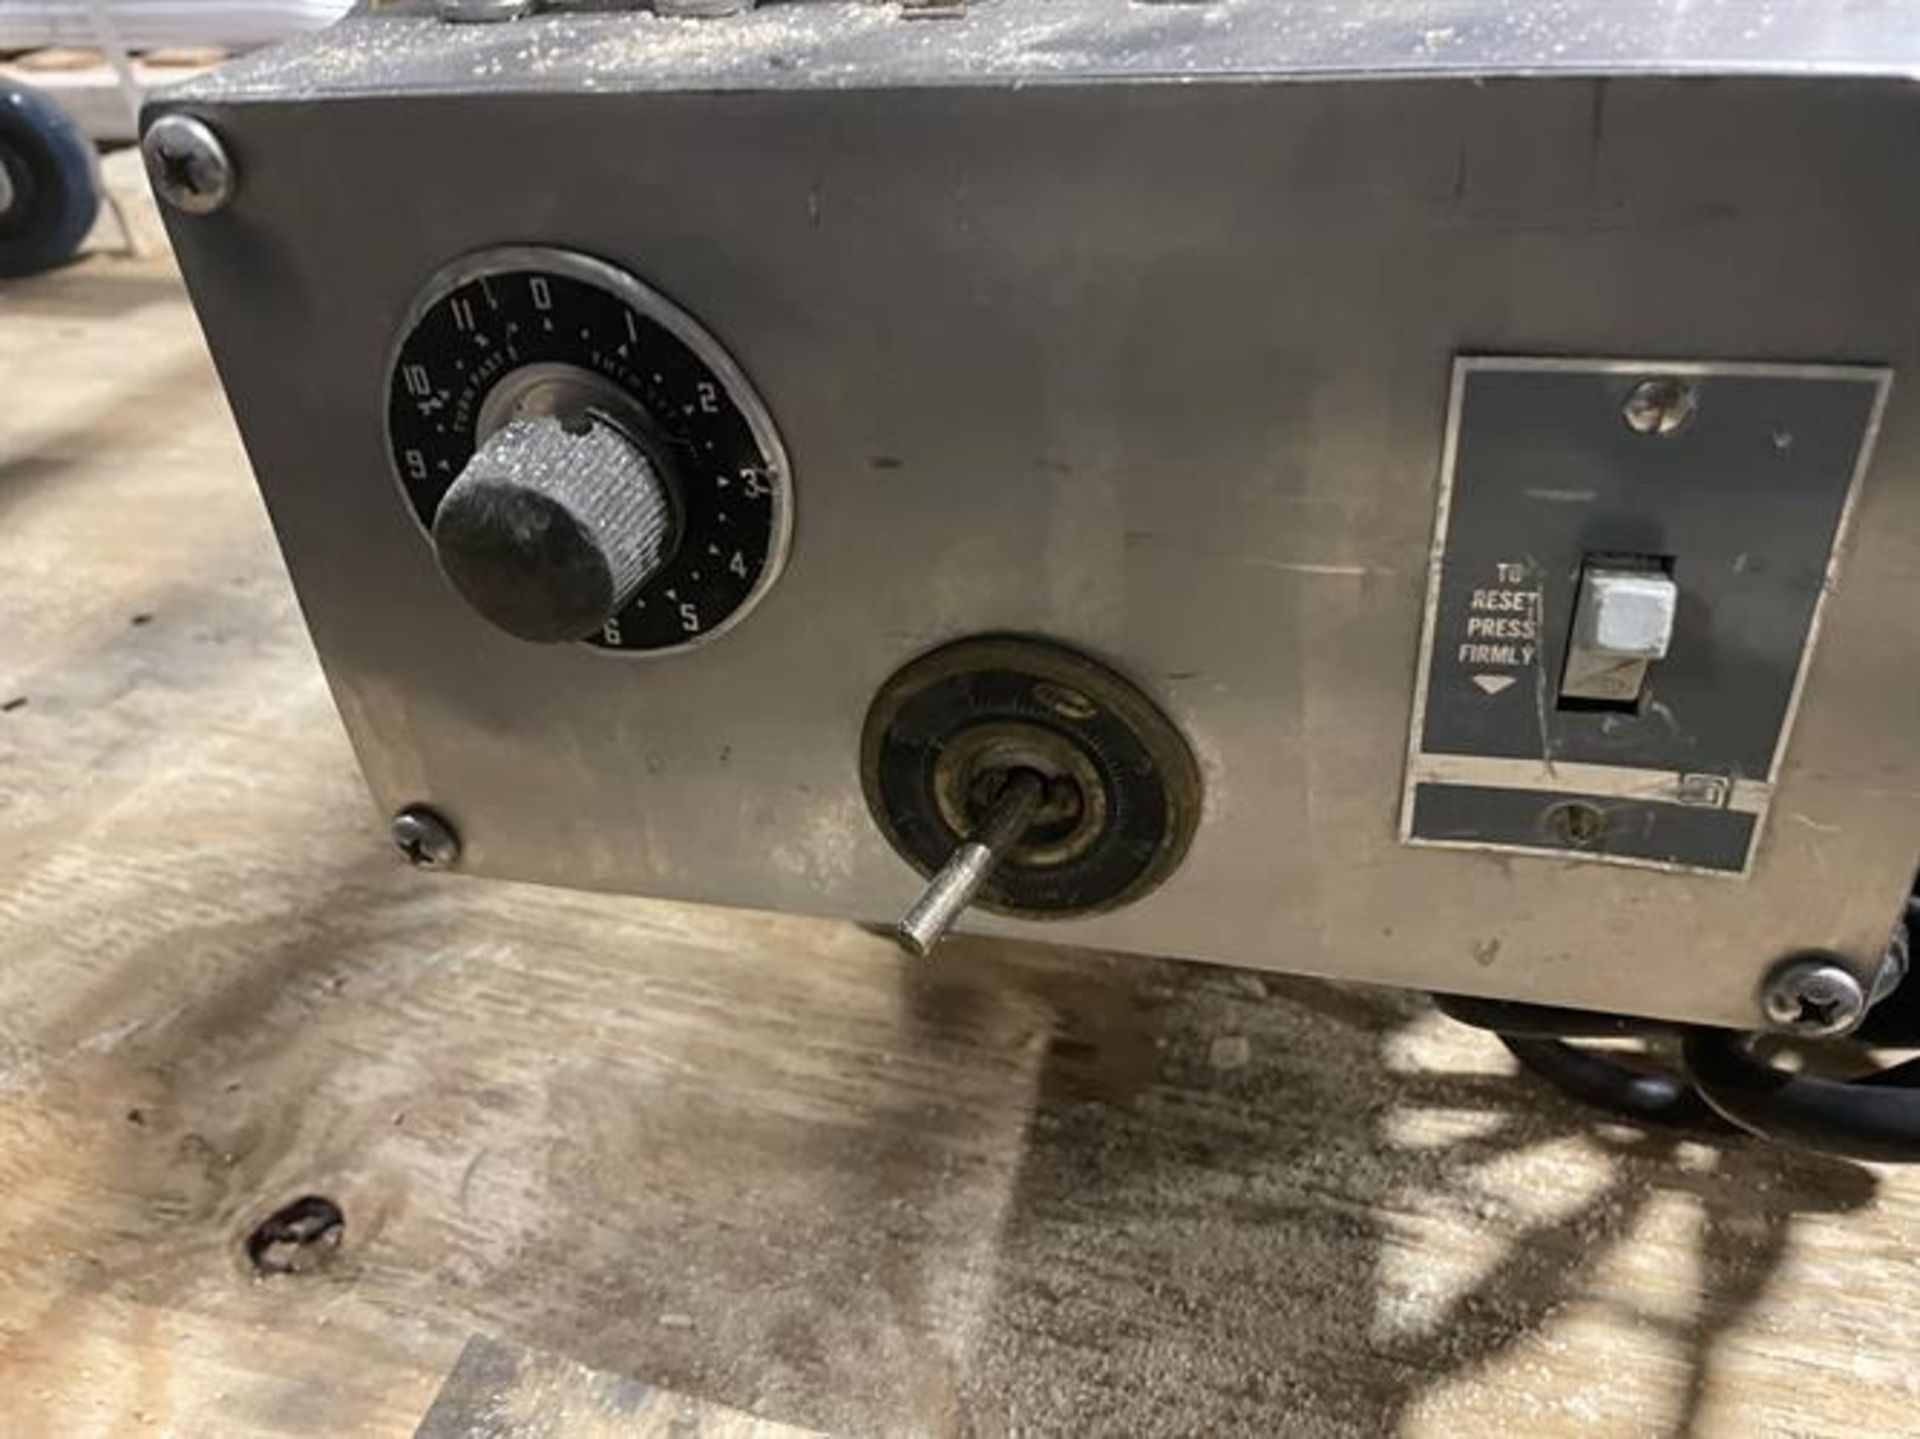 Savage 50-lb SS Chocolate Melter - Model 50 C.M.T. - Serial number 138 - Jacketed and agitated - Image 4 of 7